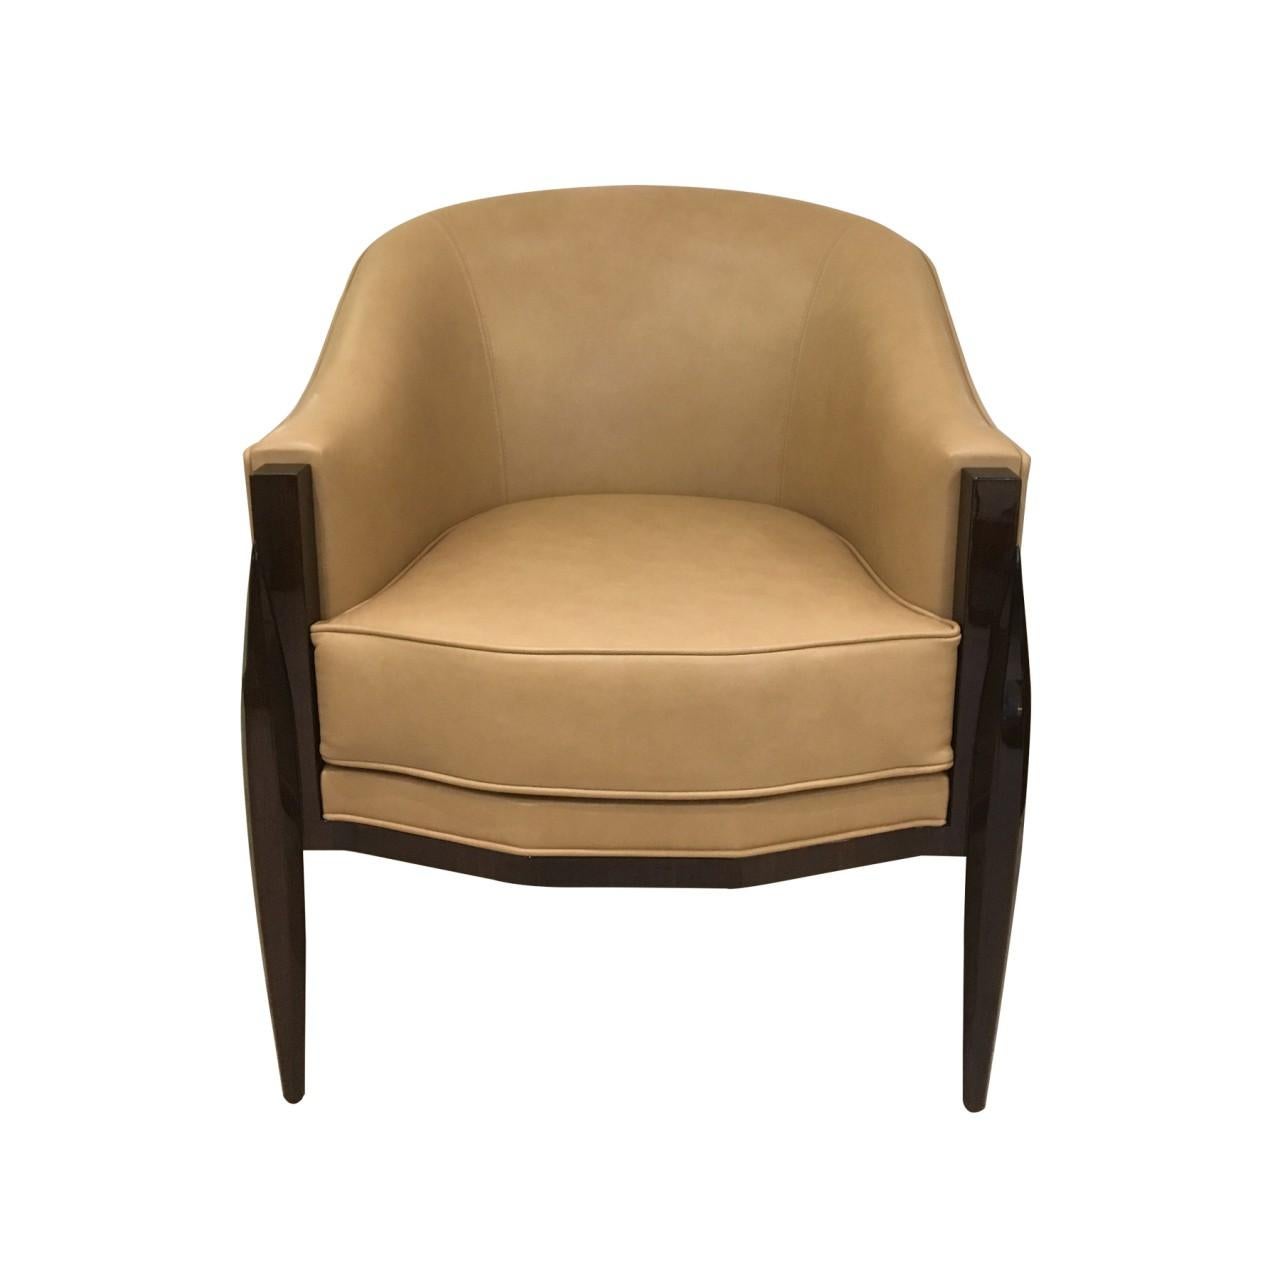 Art Deco chair with carved dark walnut legs and leather upholstery. Based on a Ruhlmann design, it can be an elegant guest chair for your office or the cozy bedroom accent chair, where you will enjoy your morning coffee and paper.
Handcrafted in